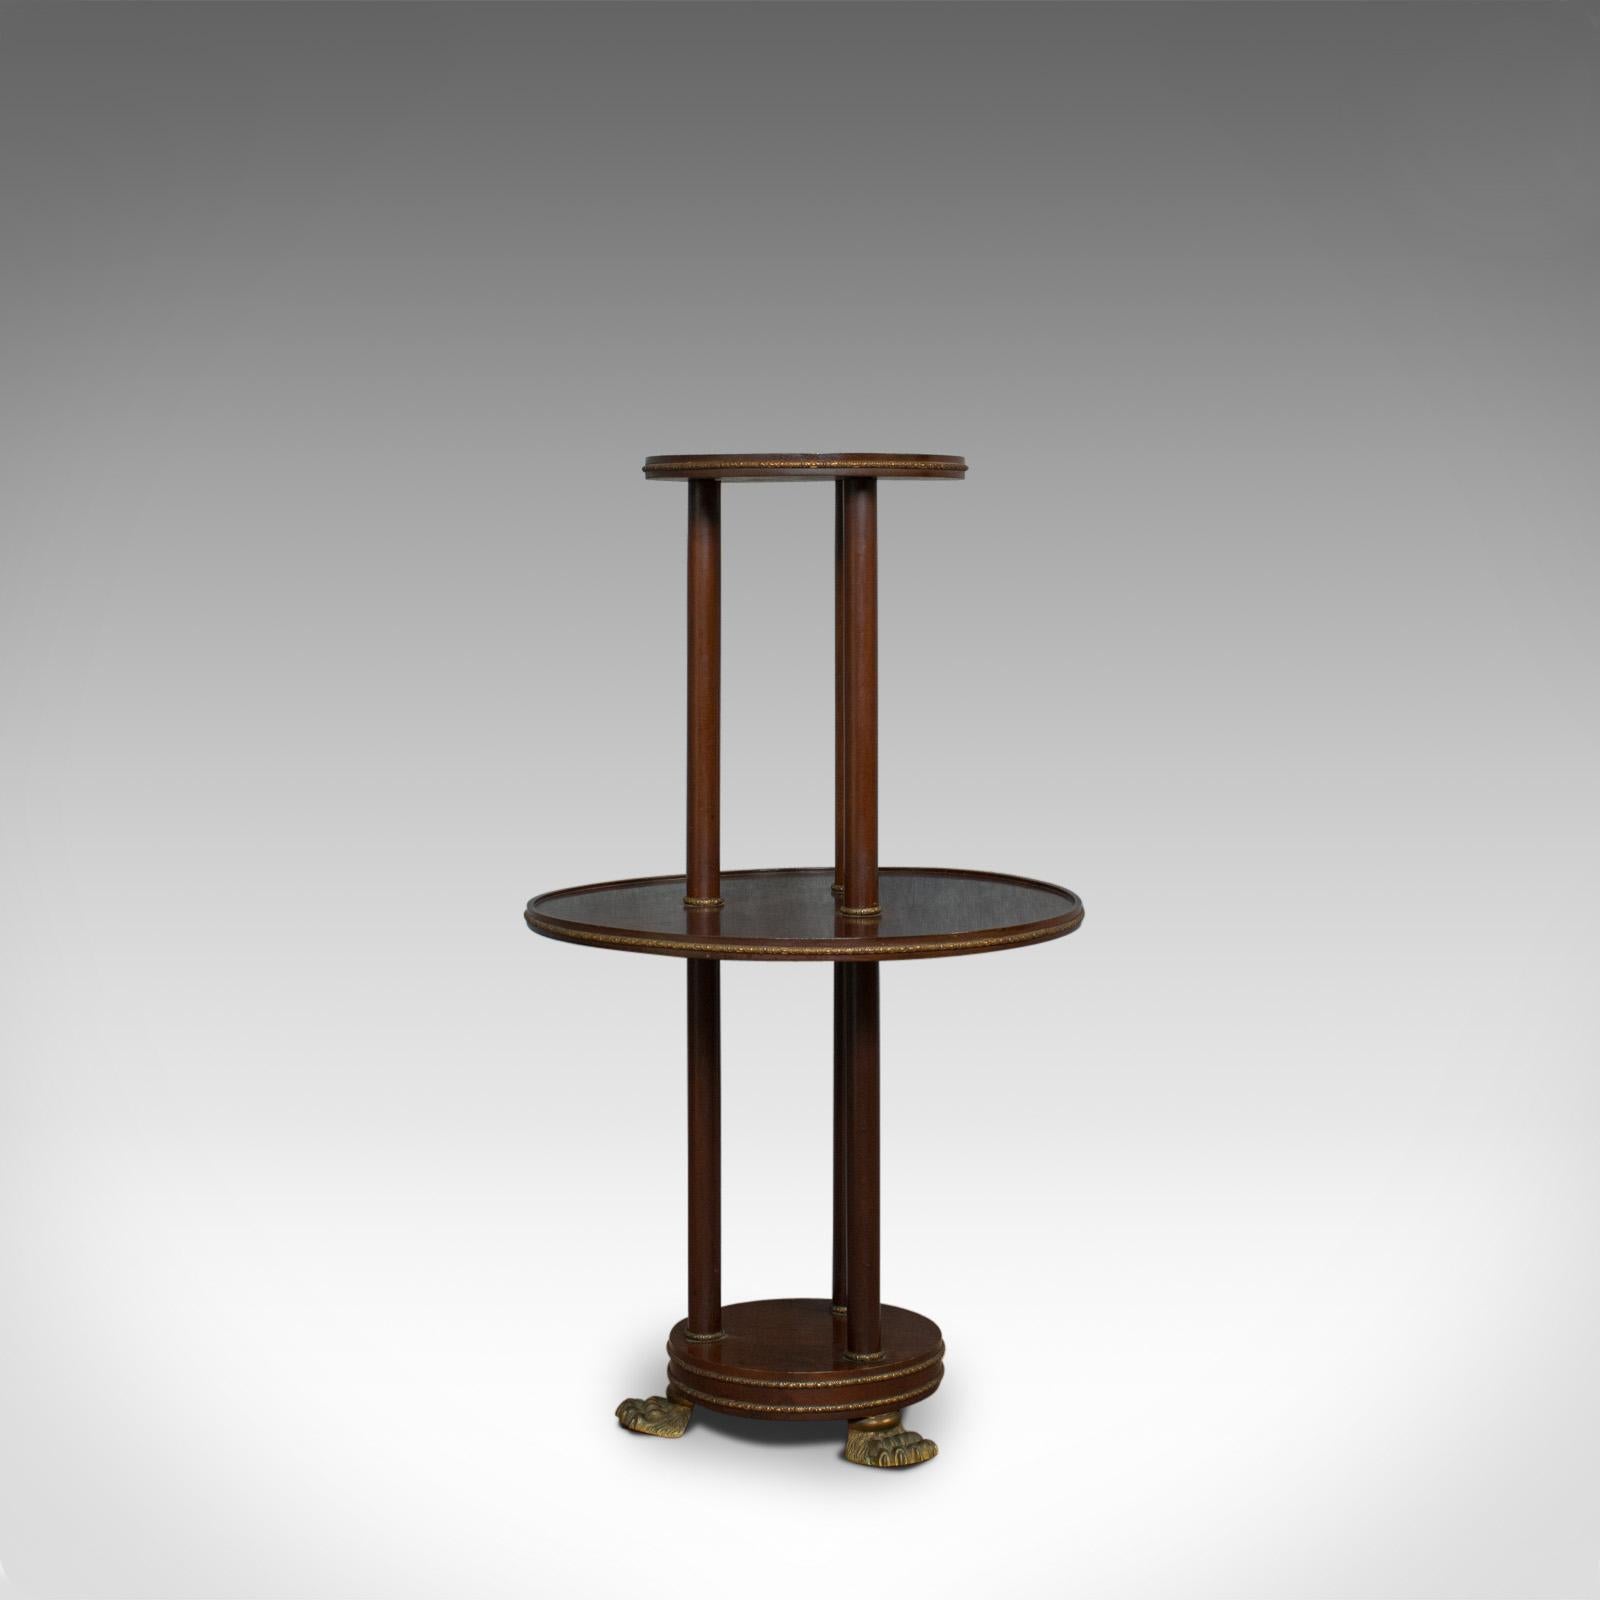 Antique Dumb Waiter, English, Victorian, Mahogany, Tiered, Empire, circa 1880 In Good Condition For Sale In Hele, Devon, GB